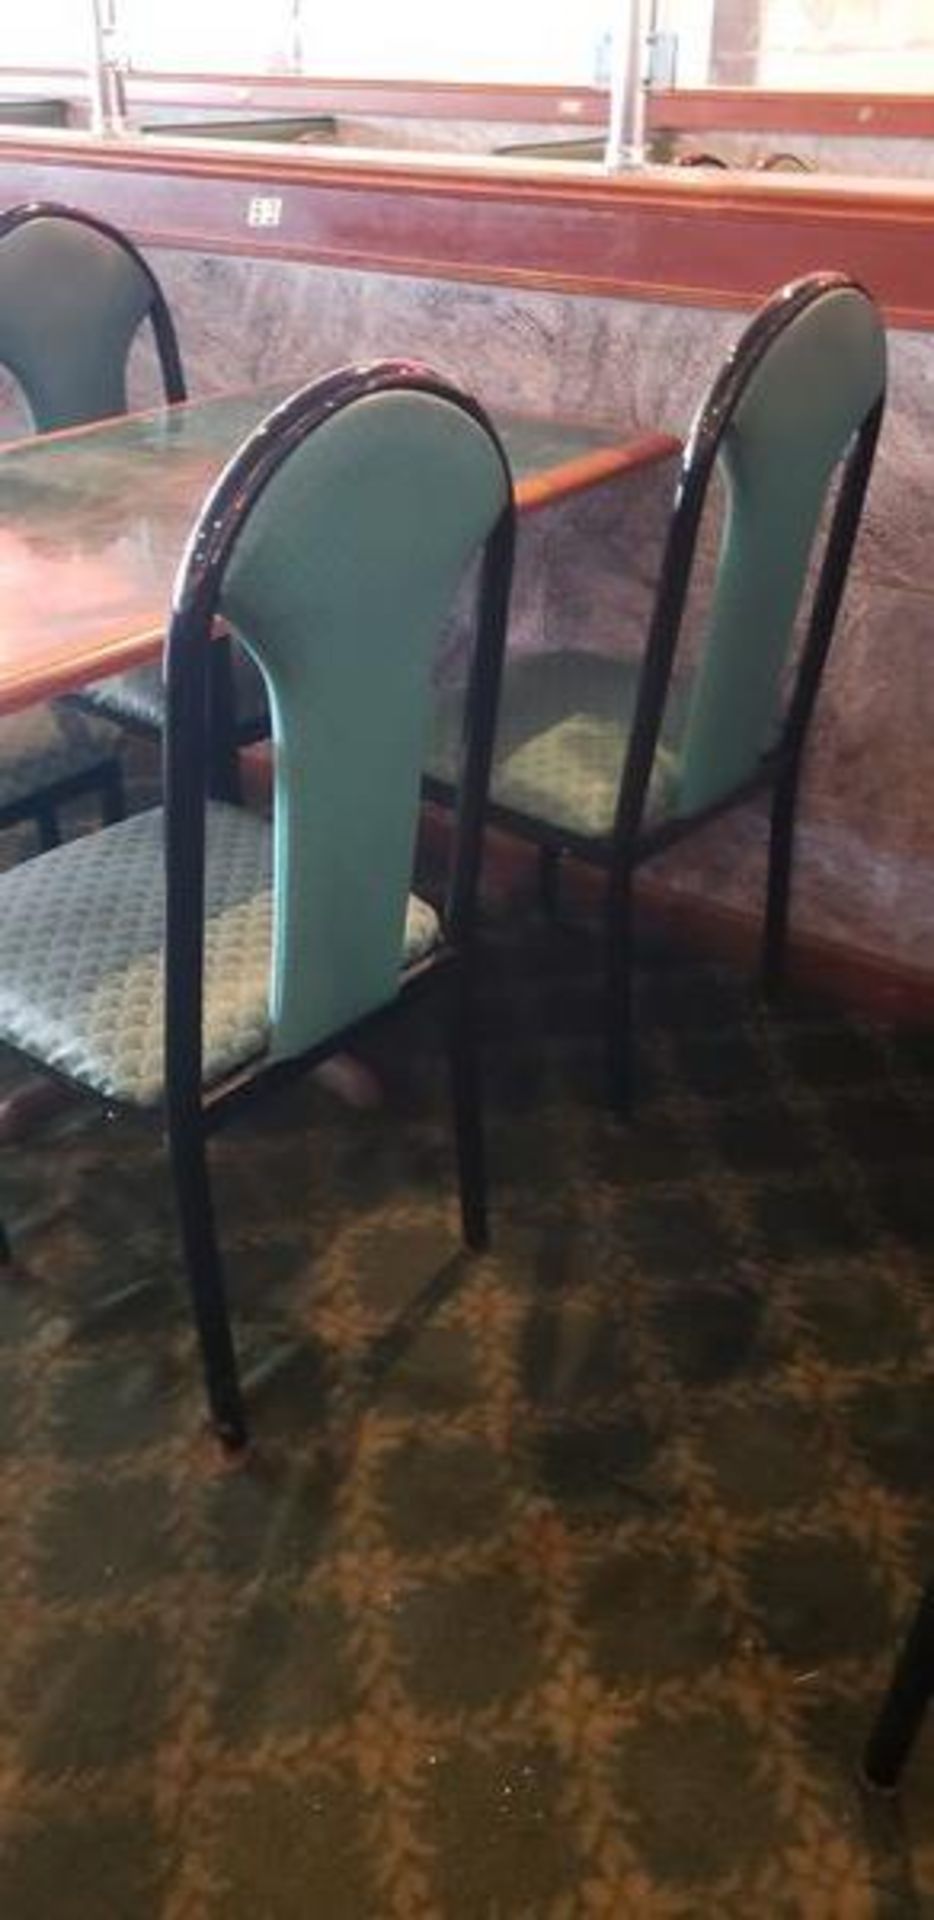 UPHOLSTERED METAL FRAME GREEN AND BLACK DINING CHAIRS - Image 5 of 6